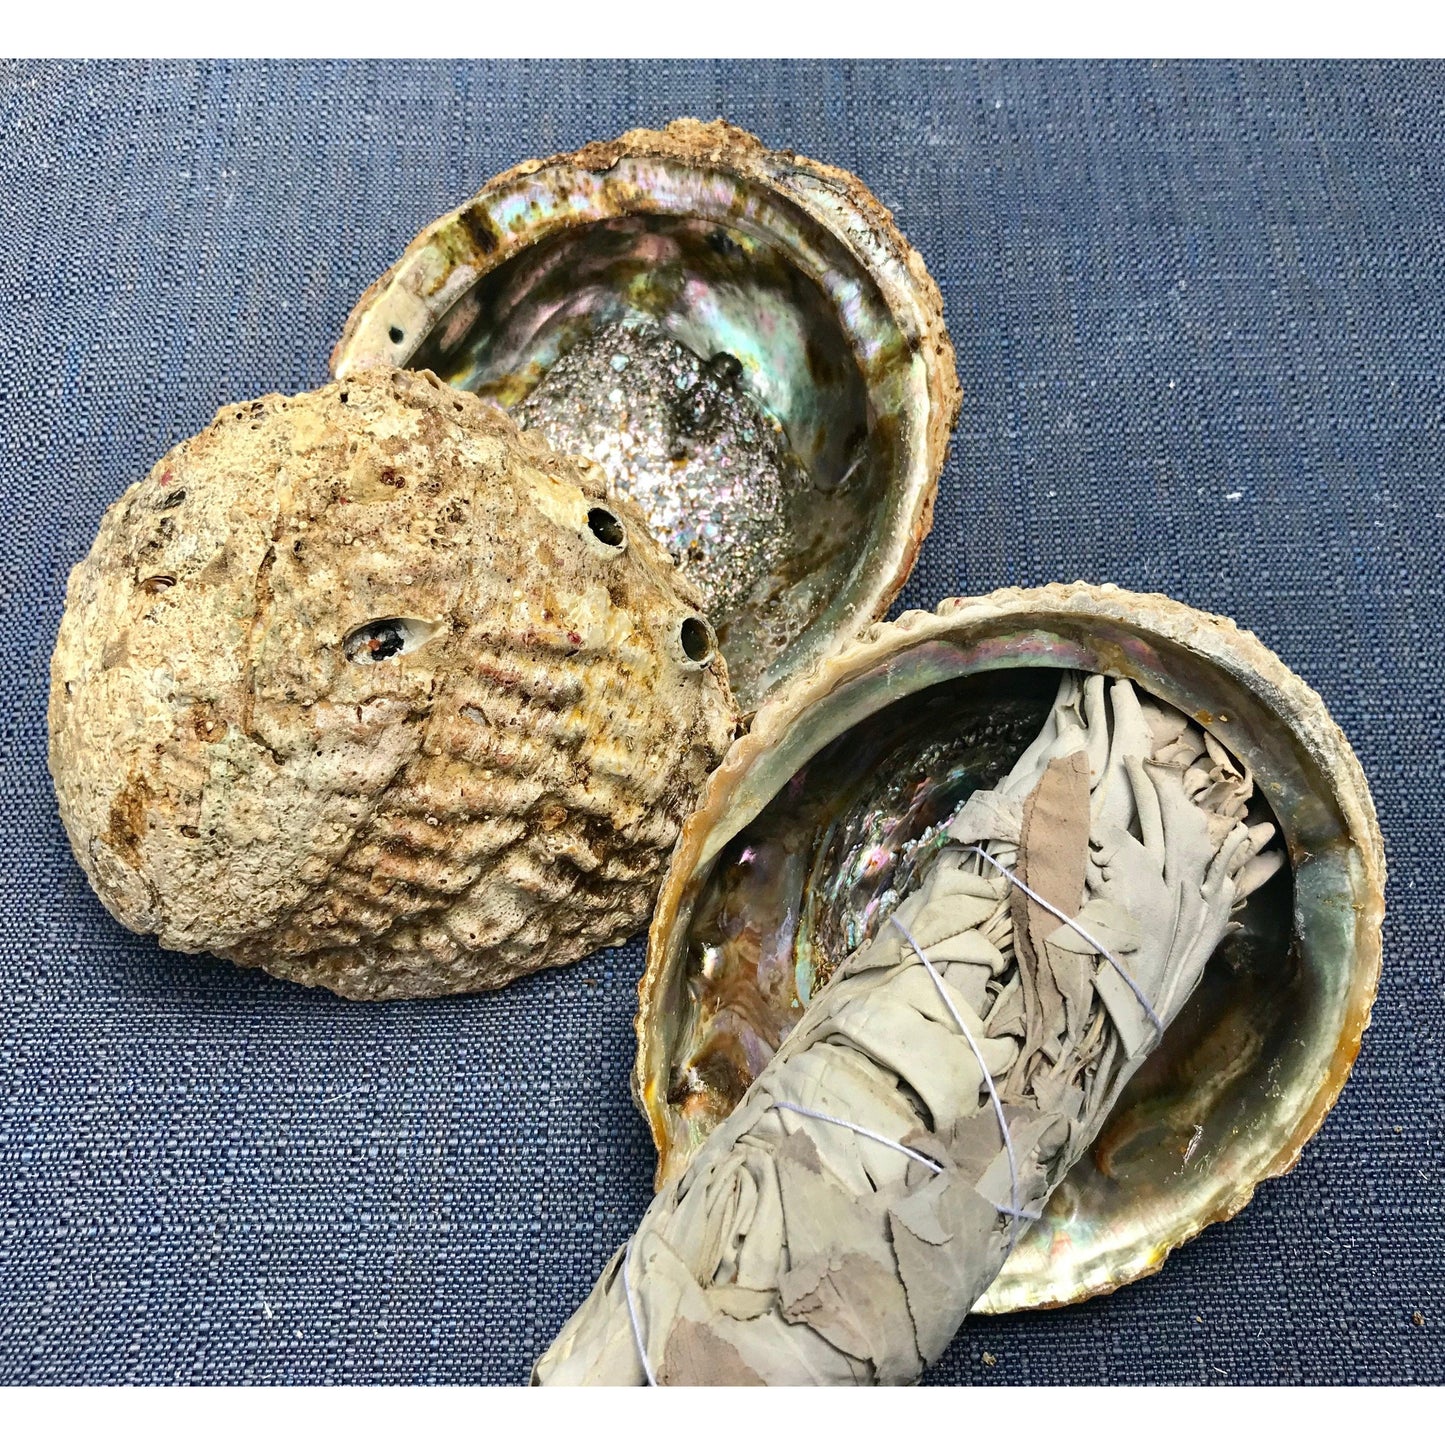 Abalone Shells for Smudging: A Gift from Mother Ocean